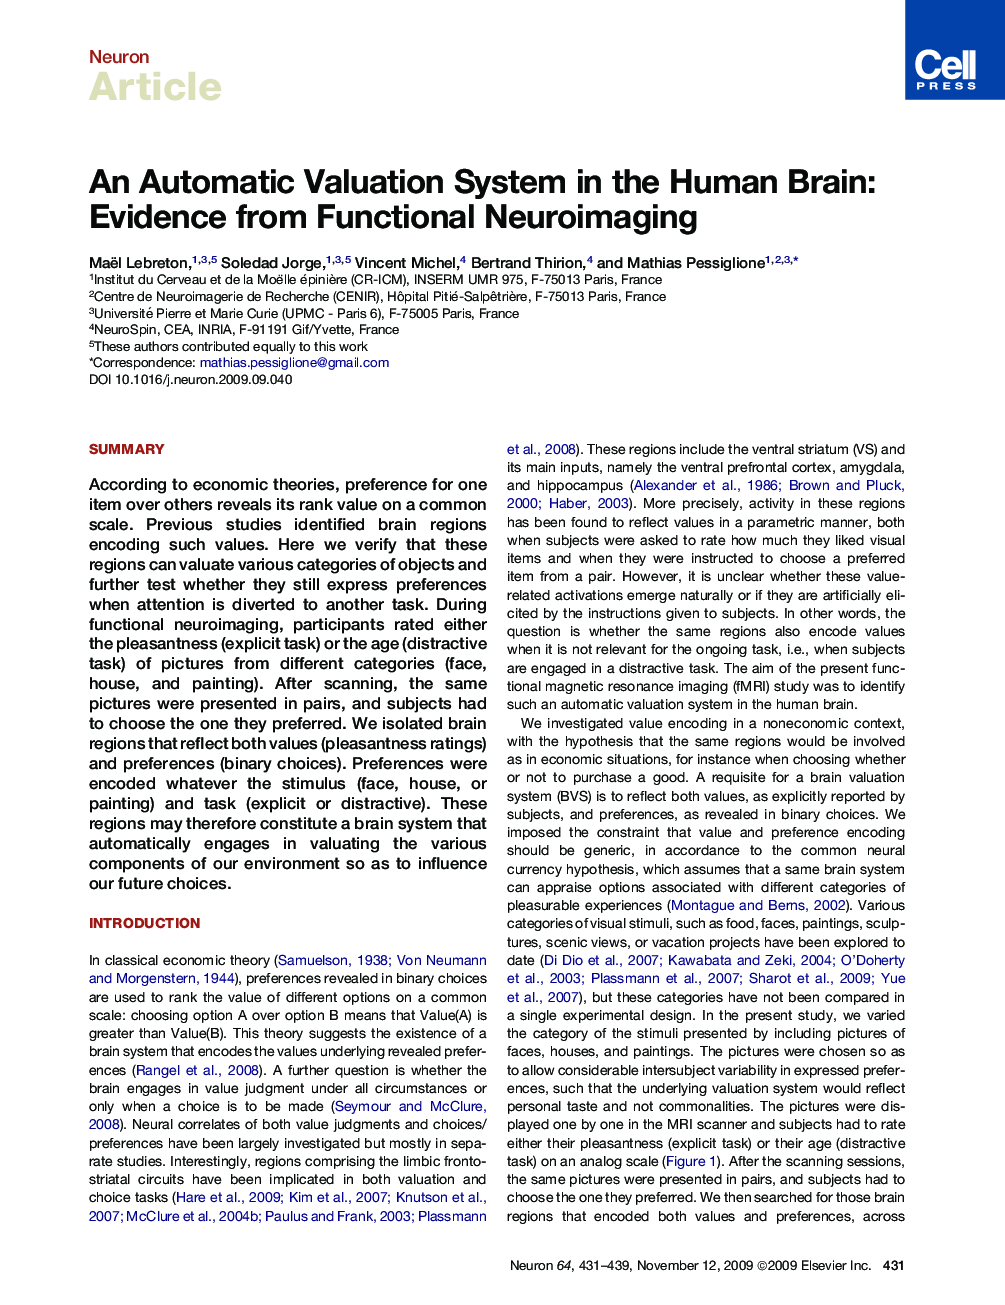 An Automatic Valuation System in the Human Brain: Evidence from Functional Neuroimaging